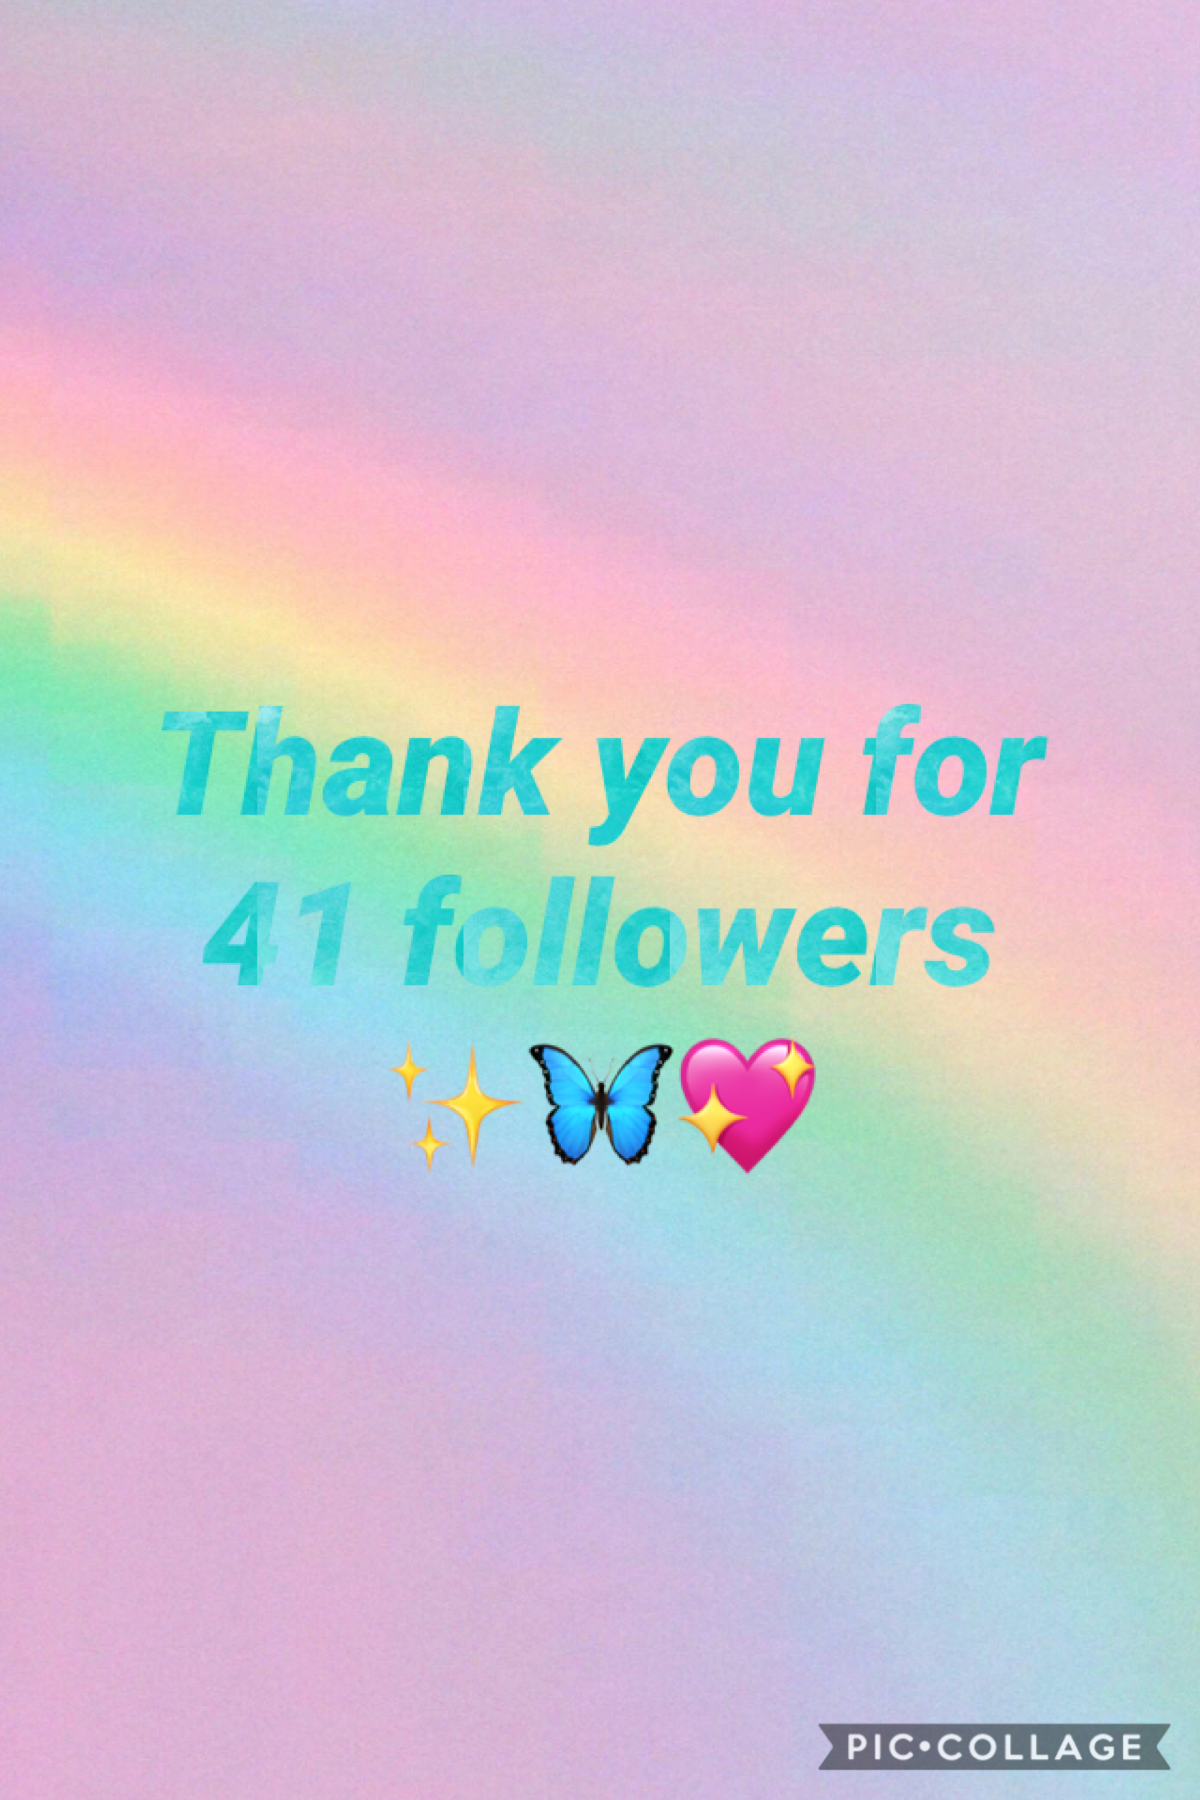 Thank you for 42 followers ✨🦋💖
Sorry about not posting regularly 
So let me know in the comments what posts would u like to see🦋
And also comment what days u would like me to post
🥴💖✨🦋💓